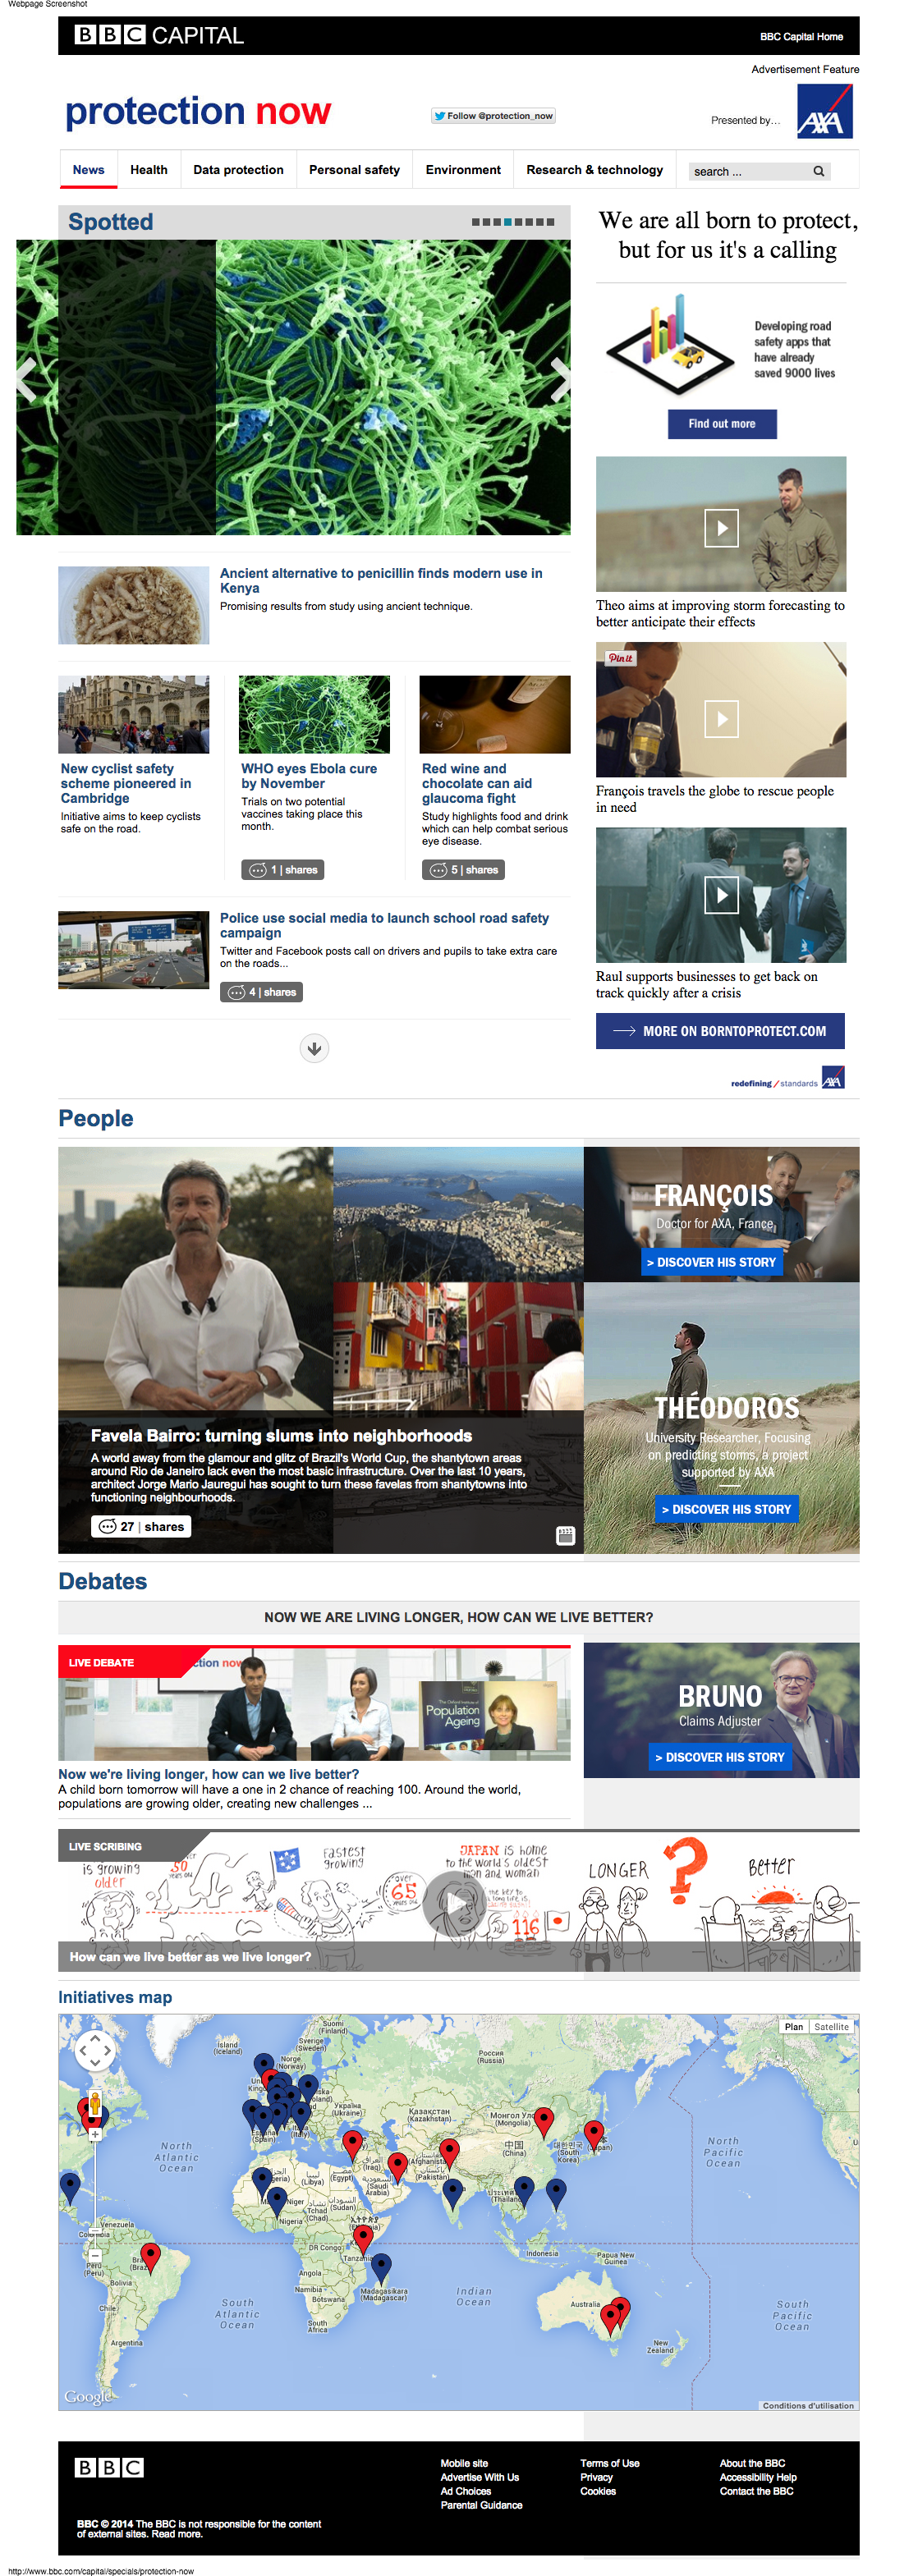 AXA launches Protection Now: a magazine published on BBC.com, produced by Take Part Media